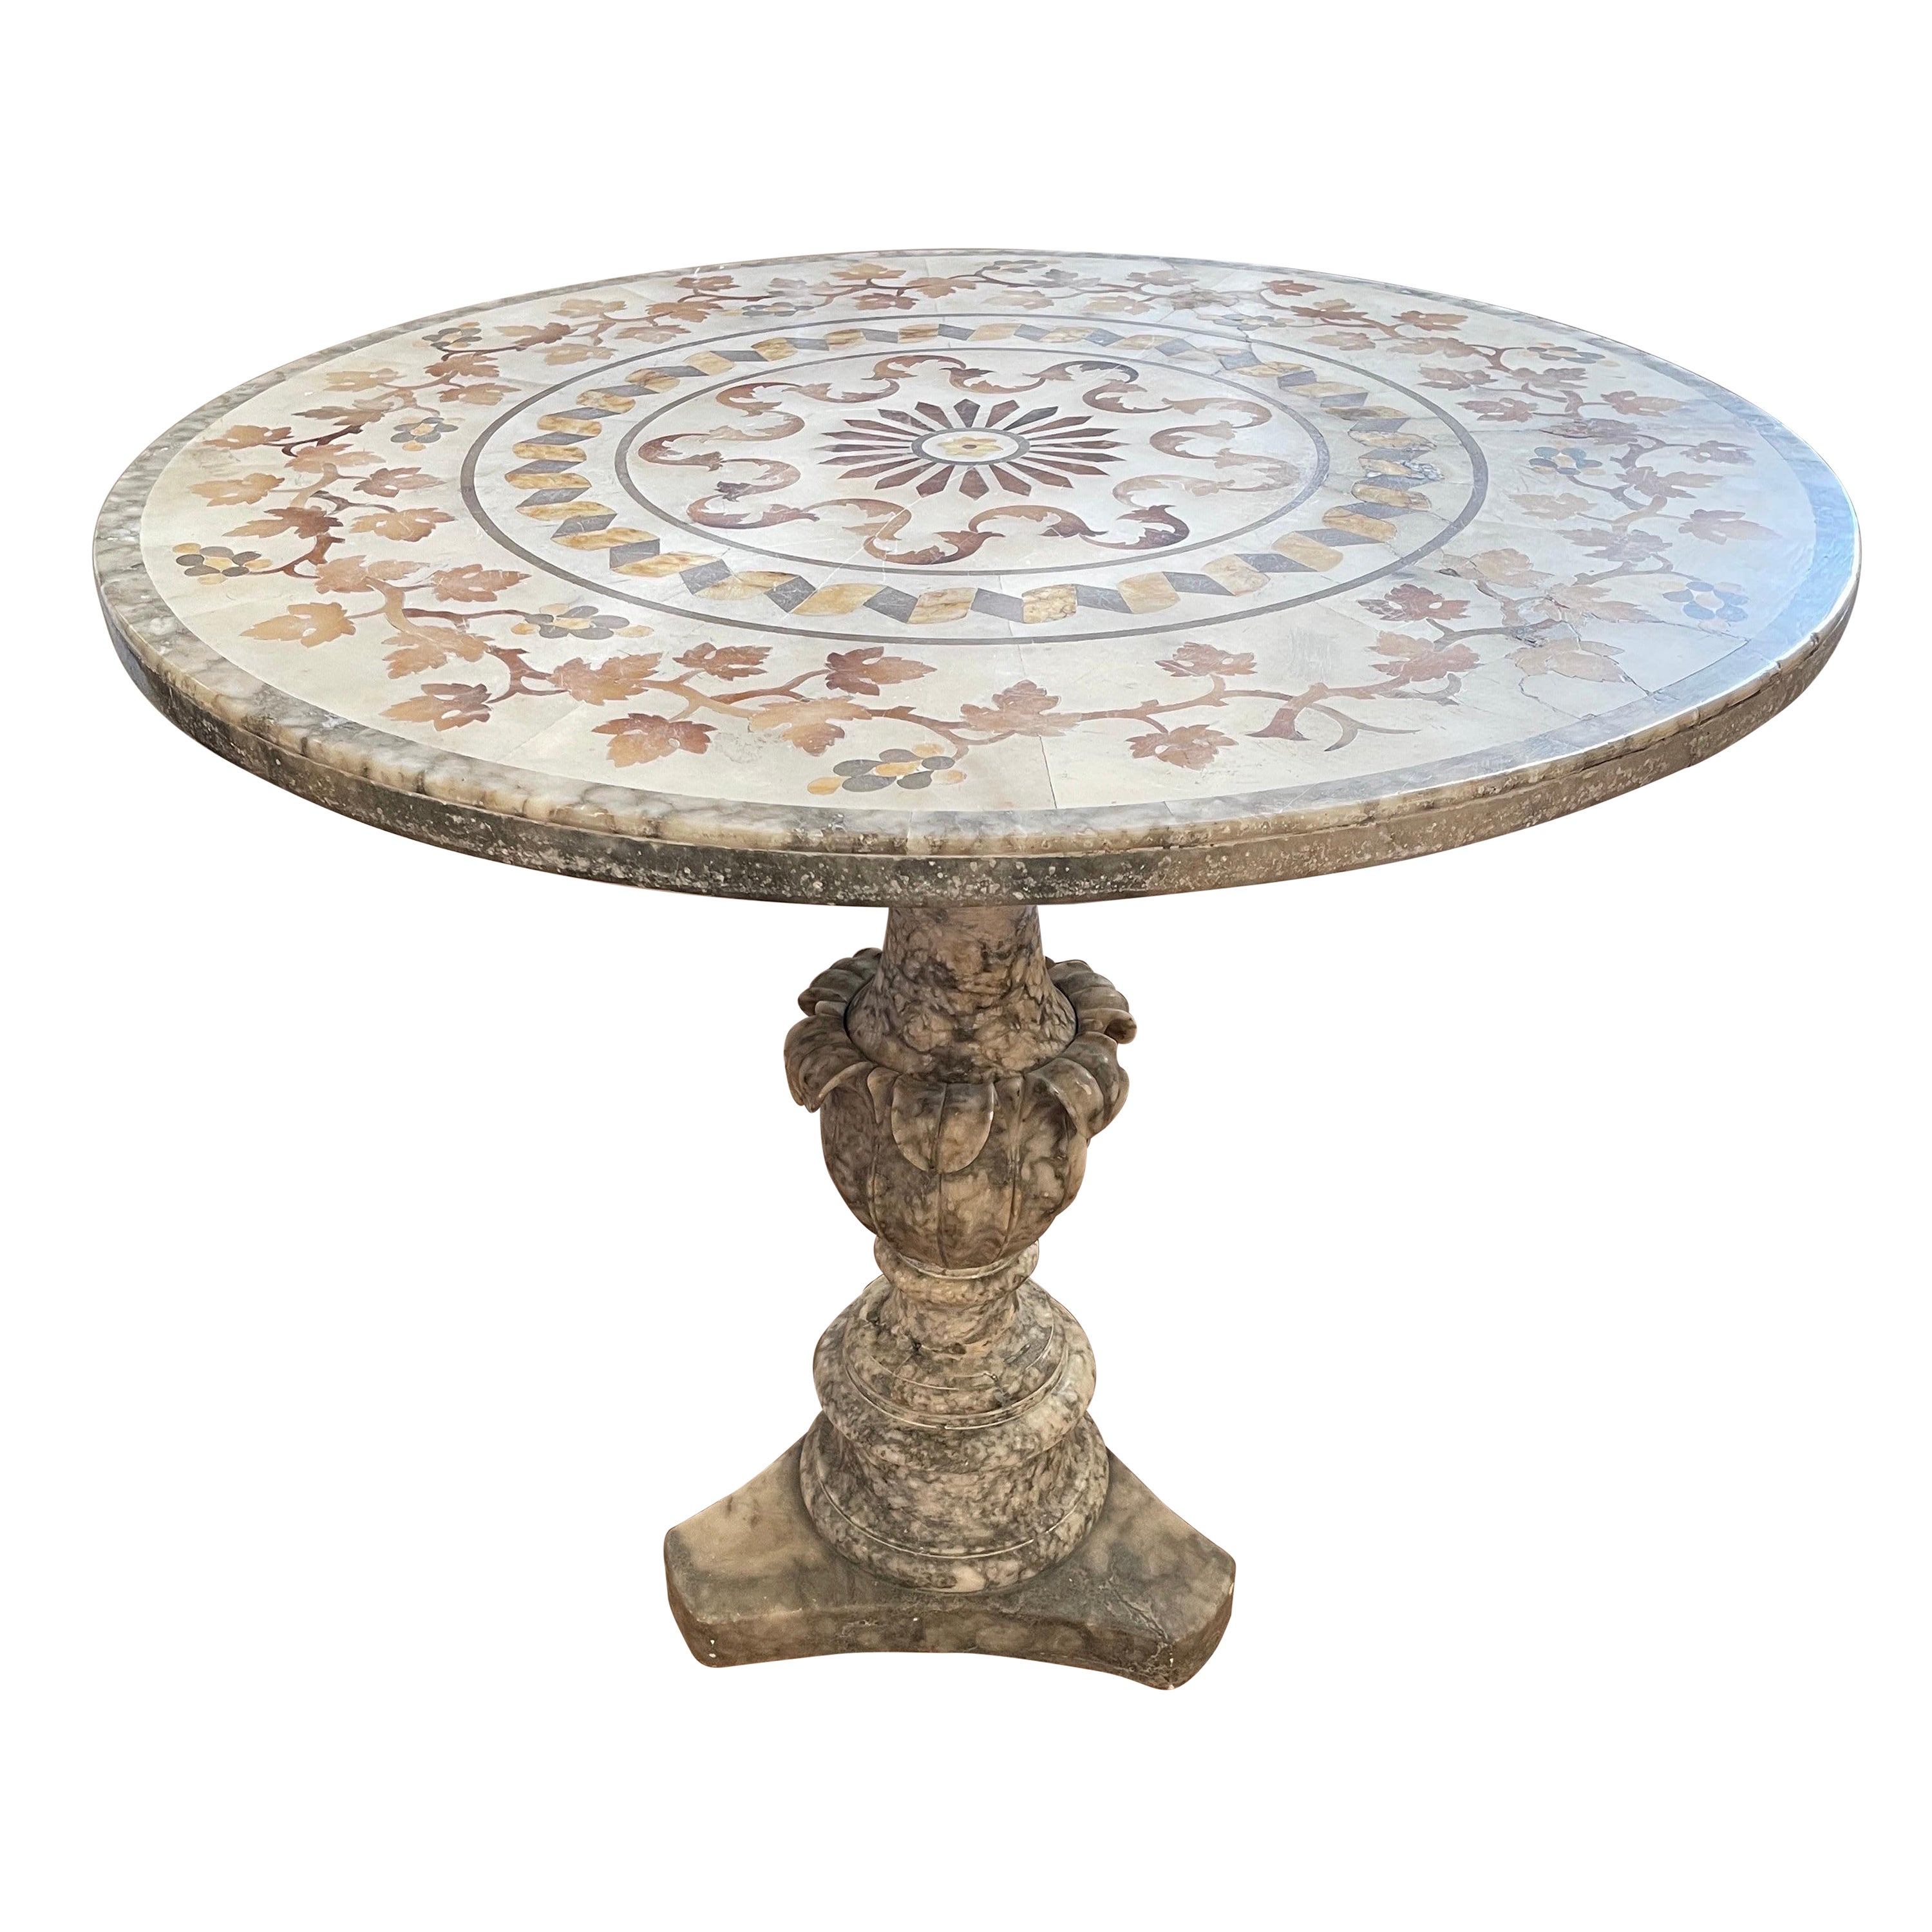 18th Century Italian Inlaid Pietra Dura Pedestal Table In Alabaster And Marble